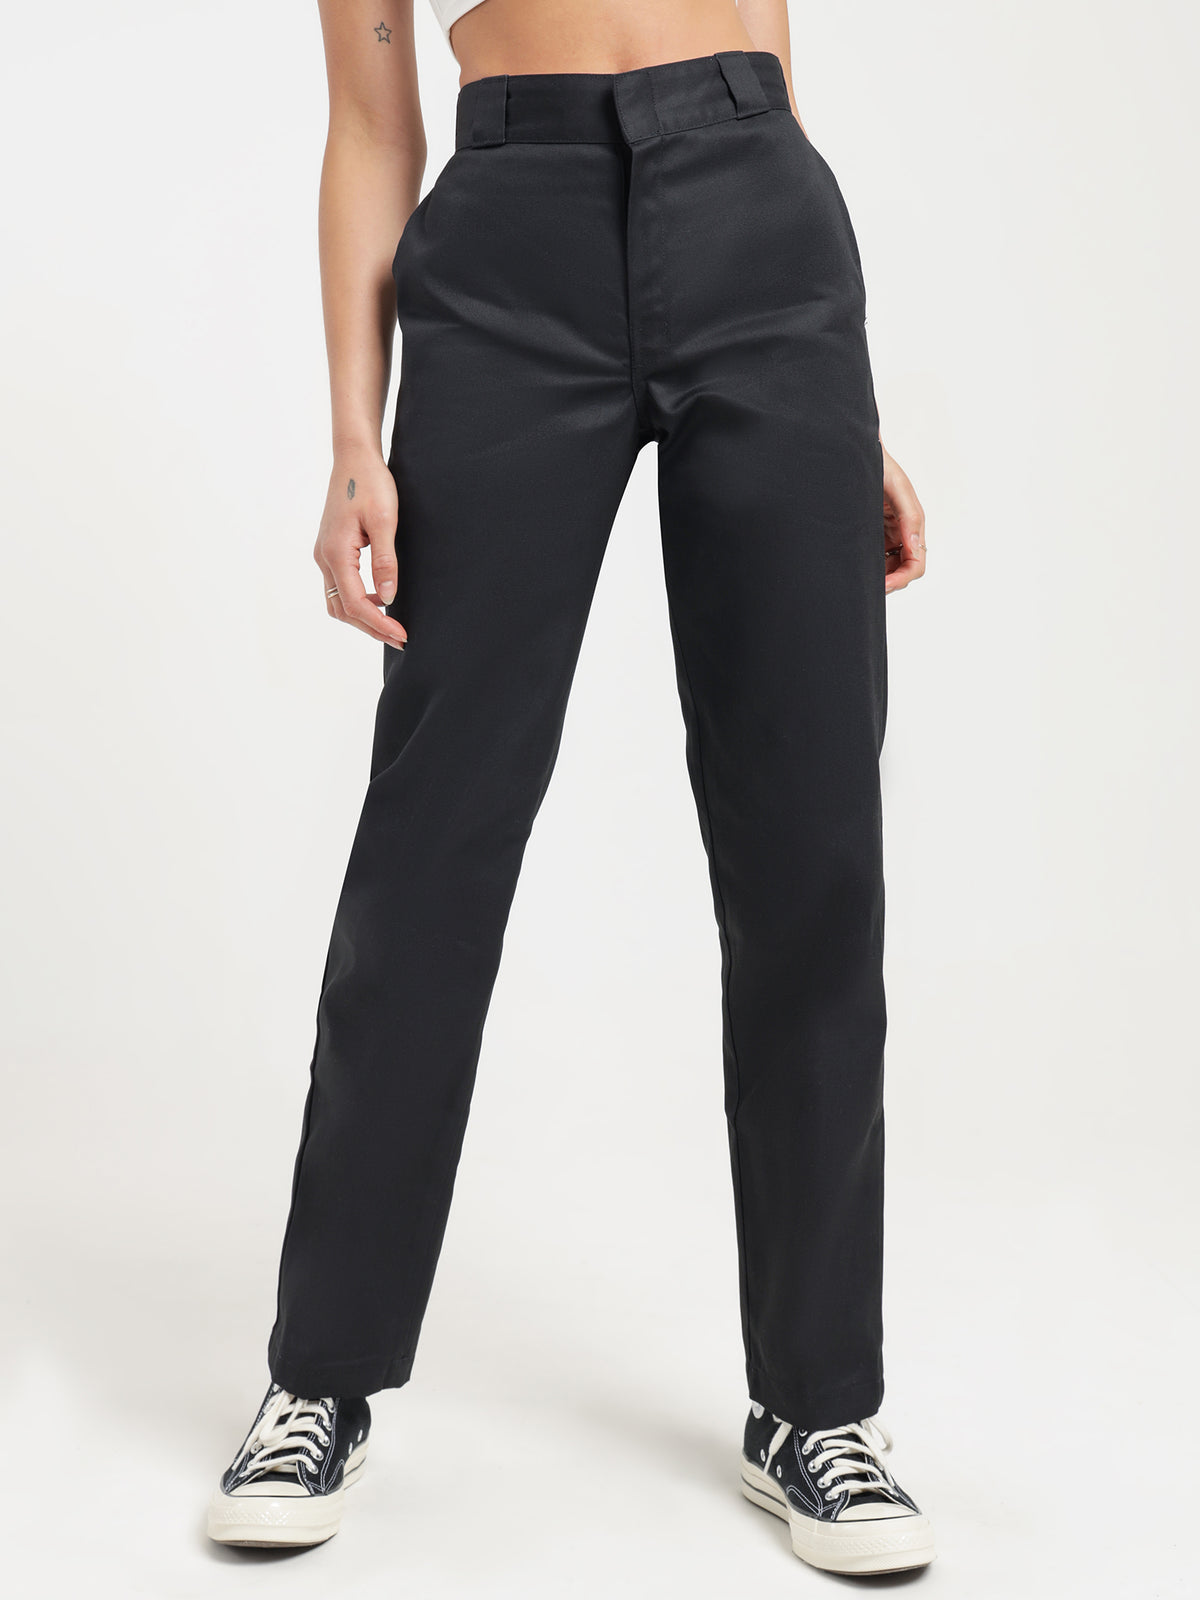 875 Tapered Fit Pants in Black